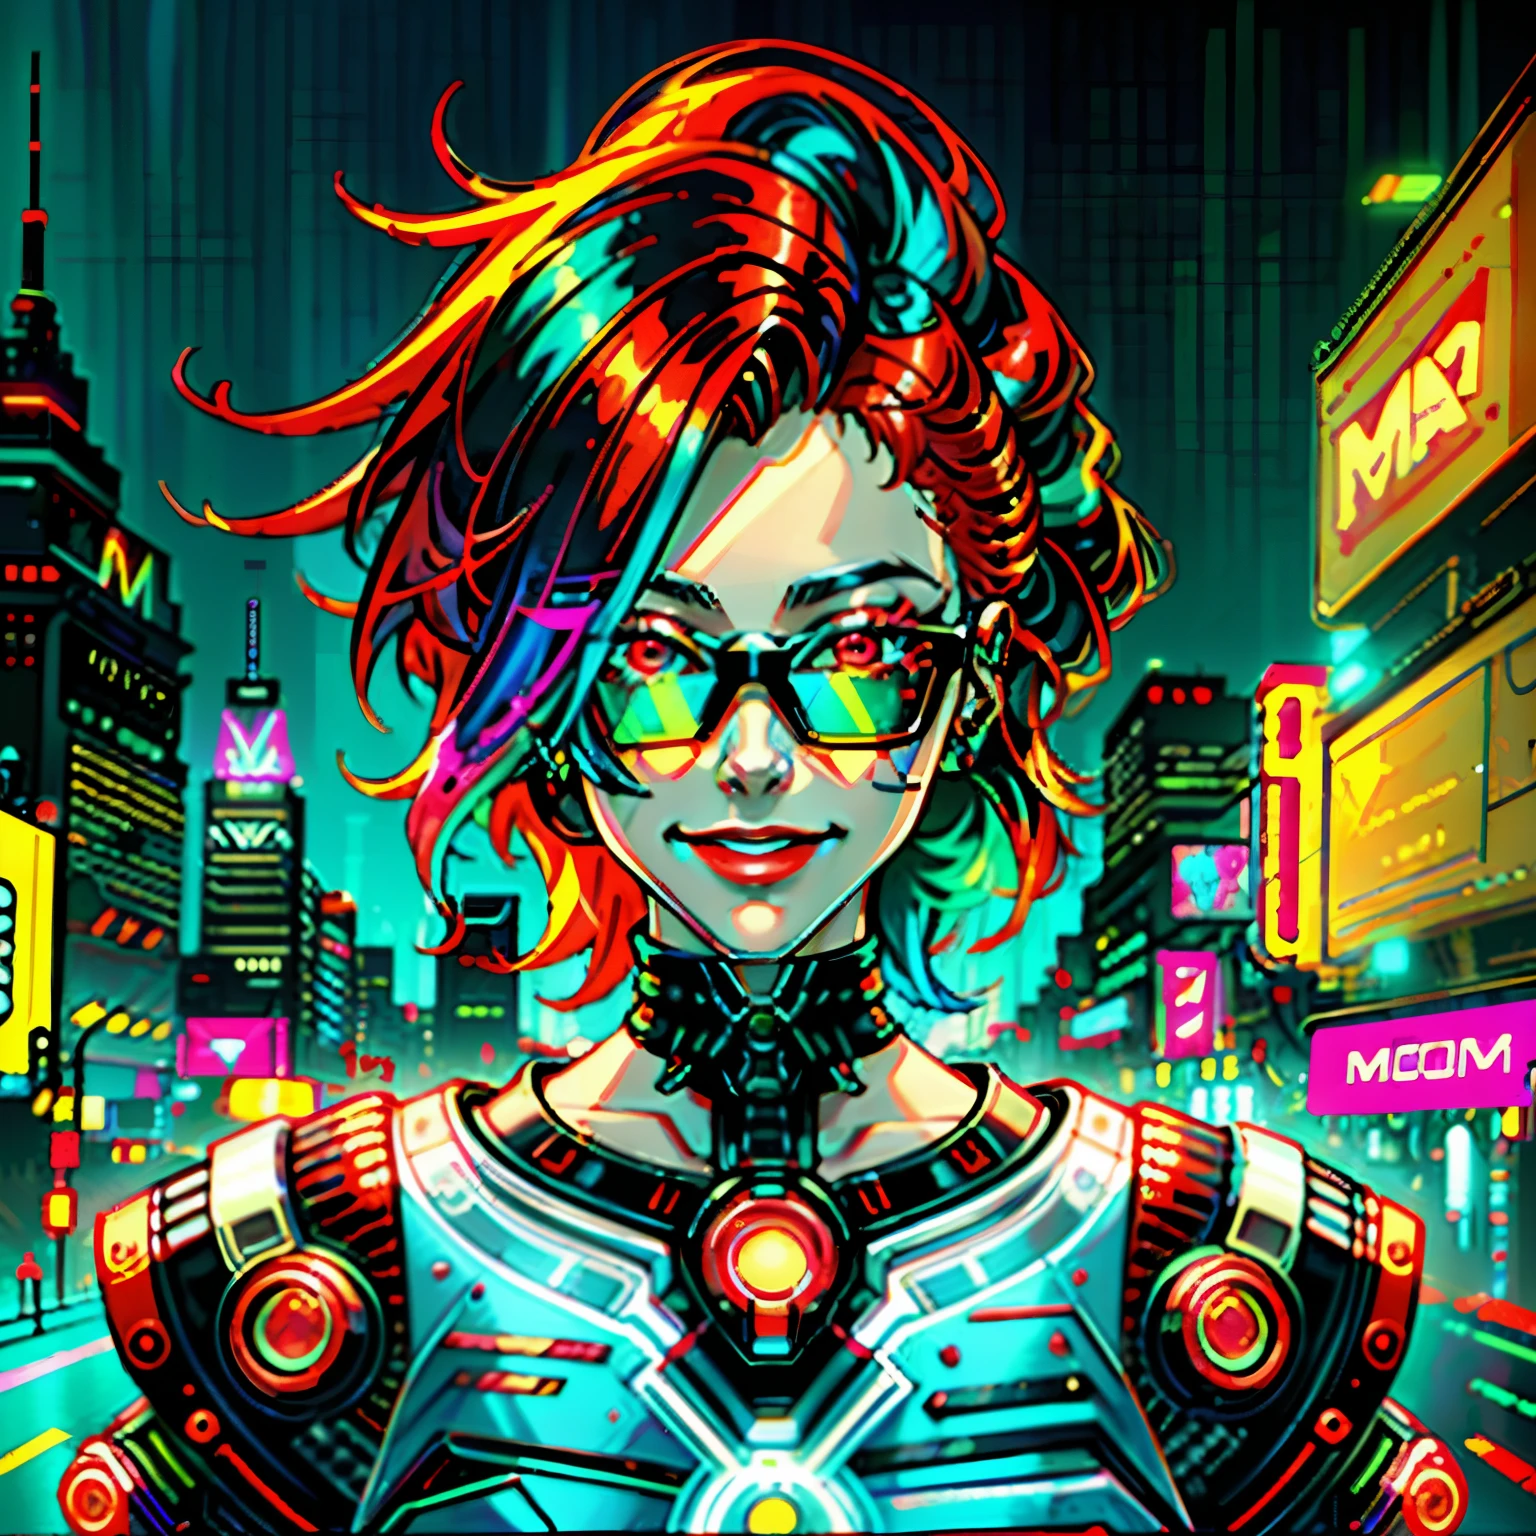 a digital painting of a woman with red hair, cyberpunk art, synthwave, futurism, neon, glowing neon, smiling, wearing a cyberpunk style colored glasses, close to face